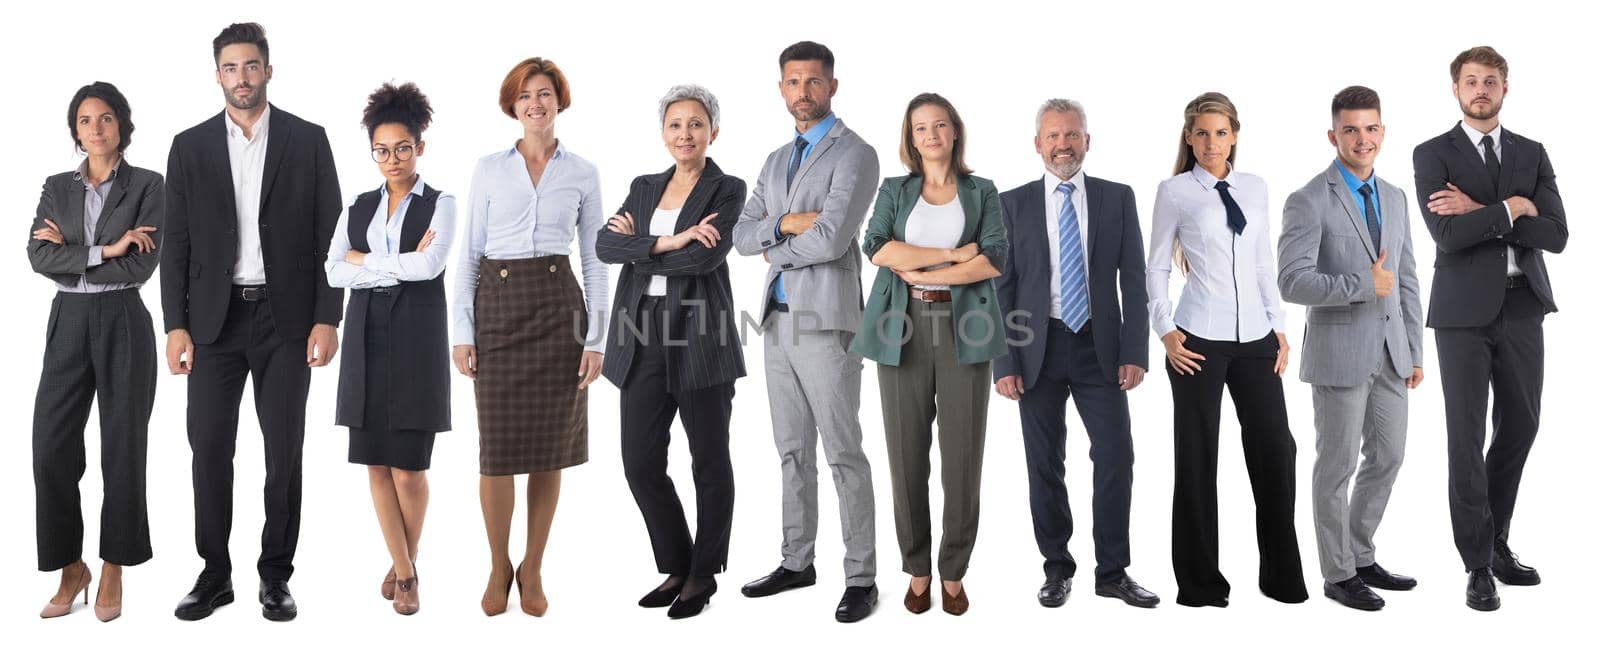 Full-length portrait of group of business people, isolated on white. Concept of teamwork and cooperation